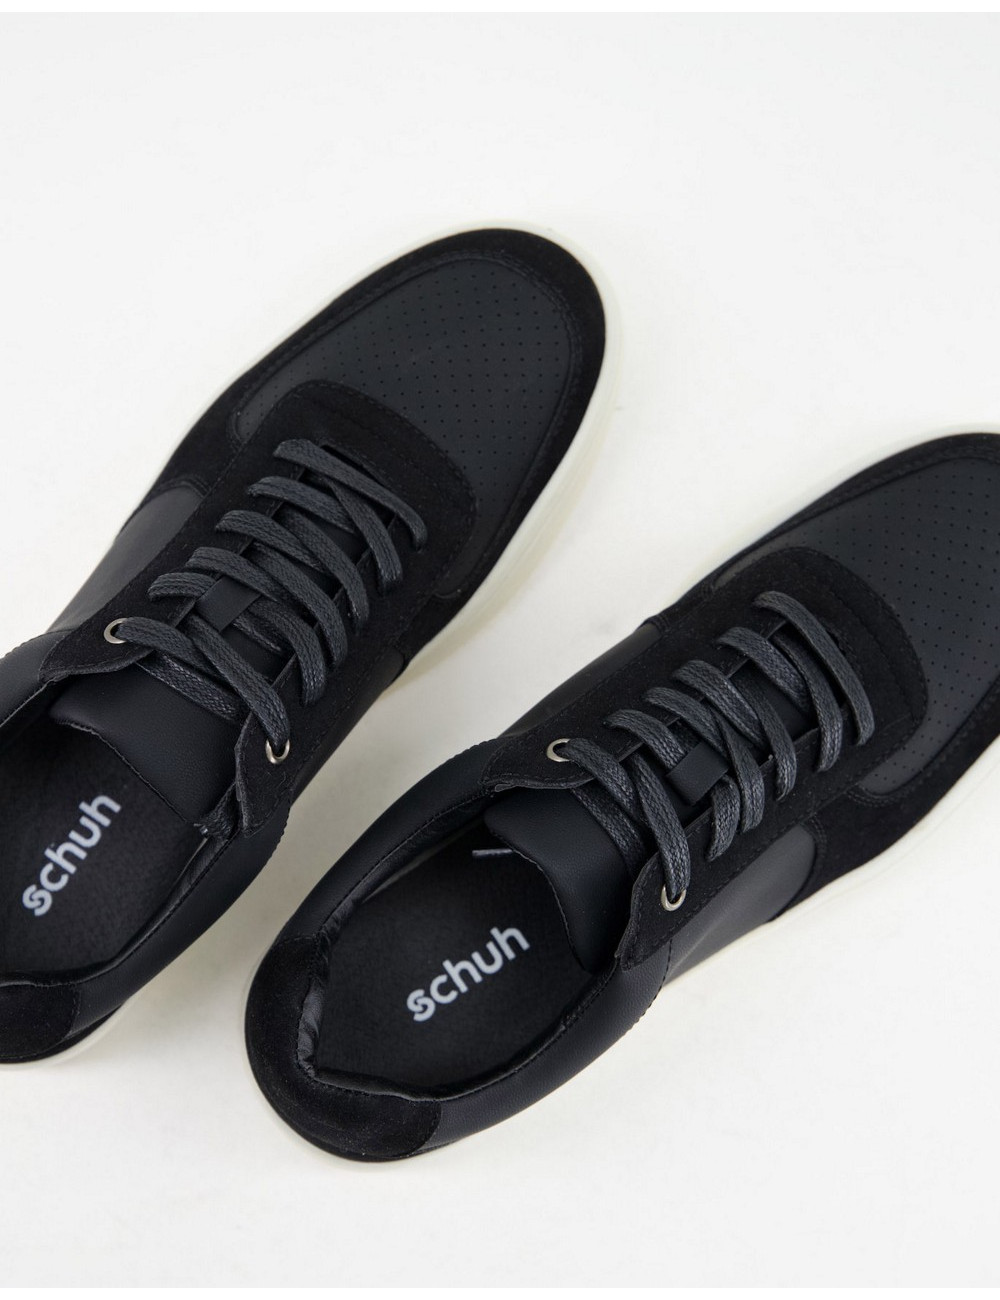 schuh will court sneakers...